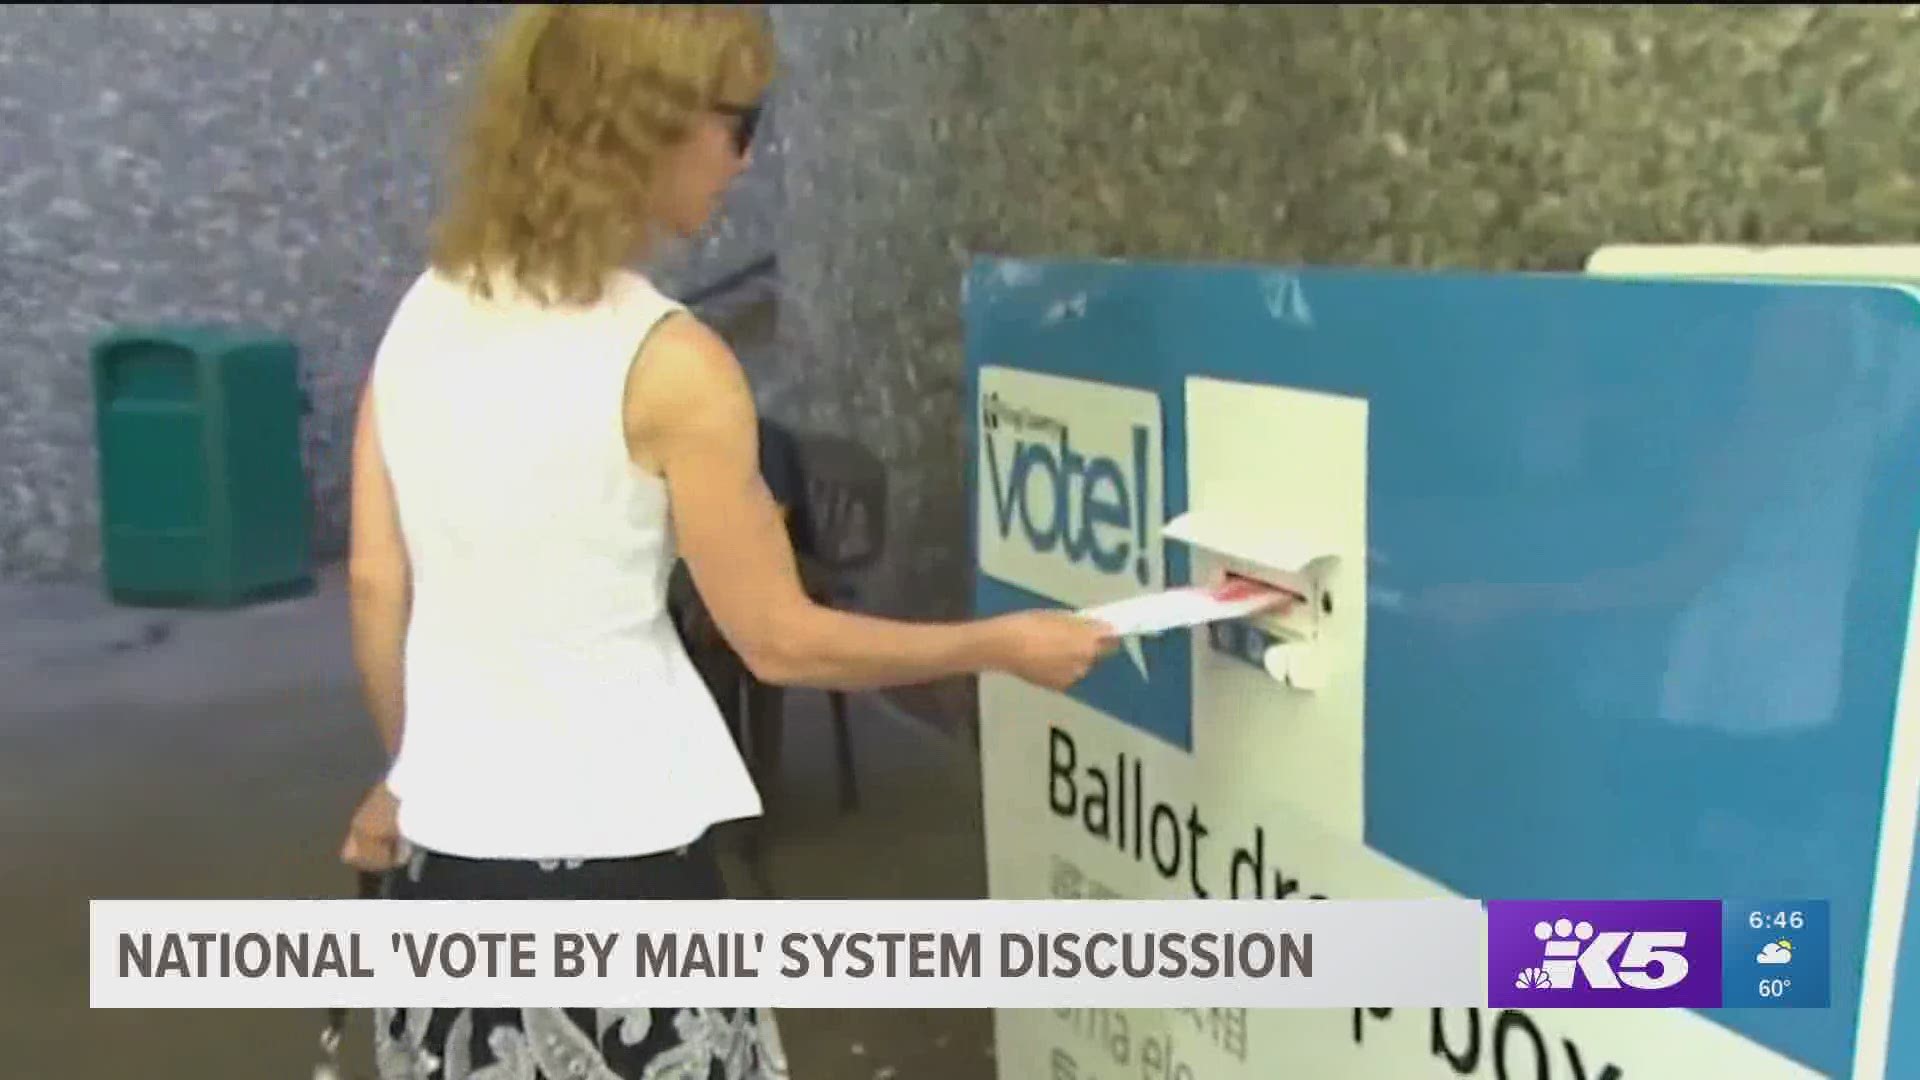 The Washington Secretary of State, a Republican, disagrees with President Trump that there is fraud or corruption with the mail-in vote systems.